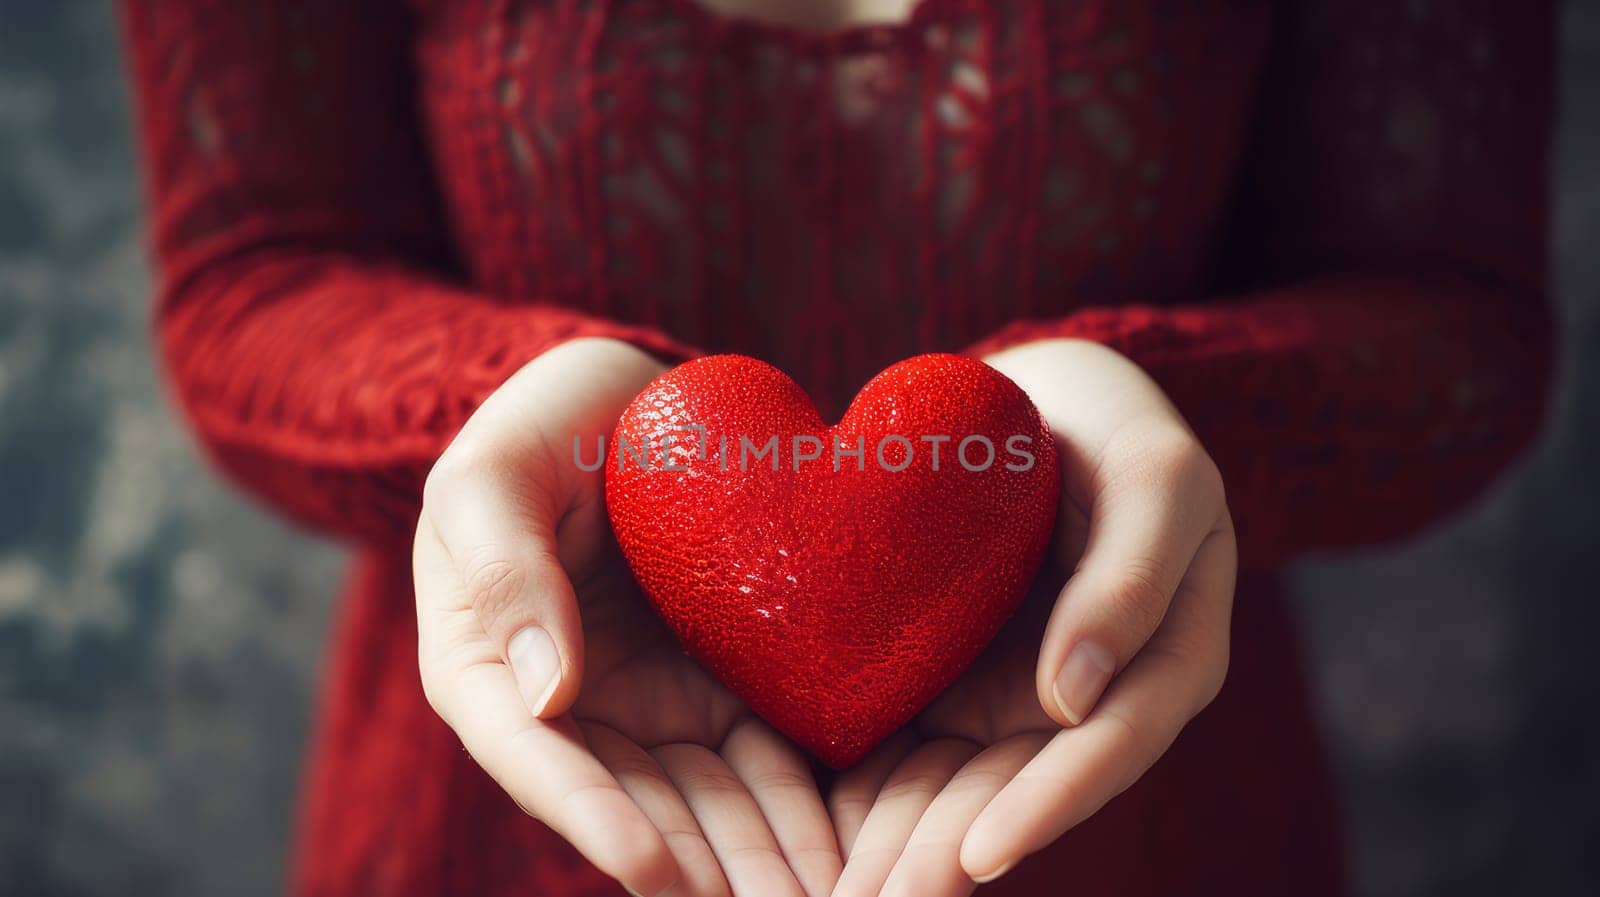 Red heart in woman's hands on Valentine's Day. by Alla_Yurtayeva